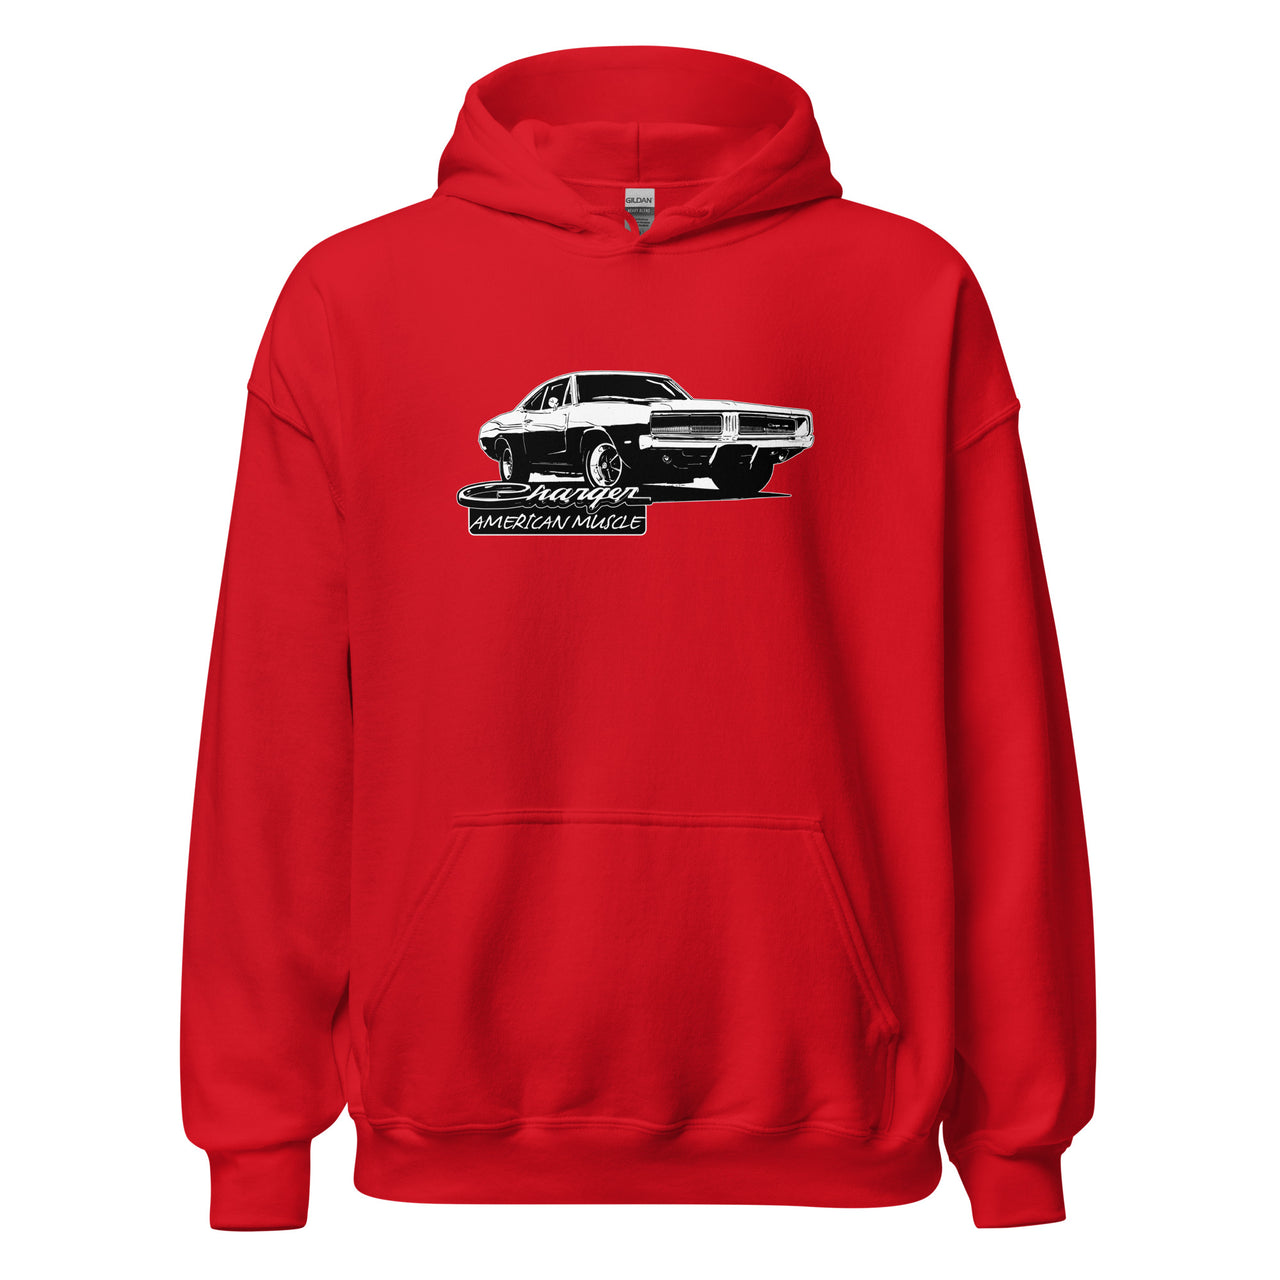 1969 Charger Hoodie in red